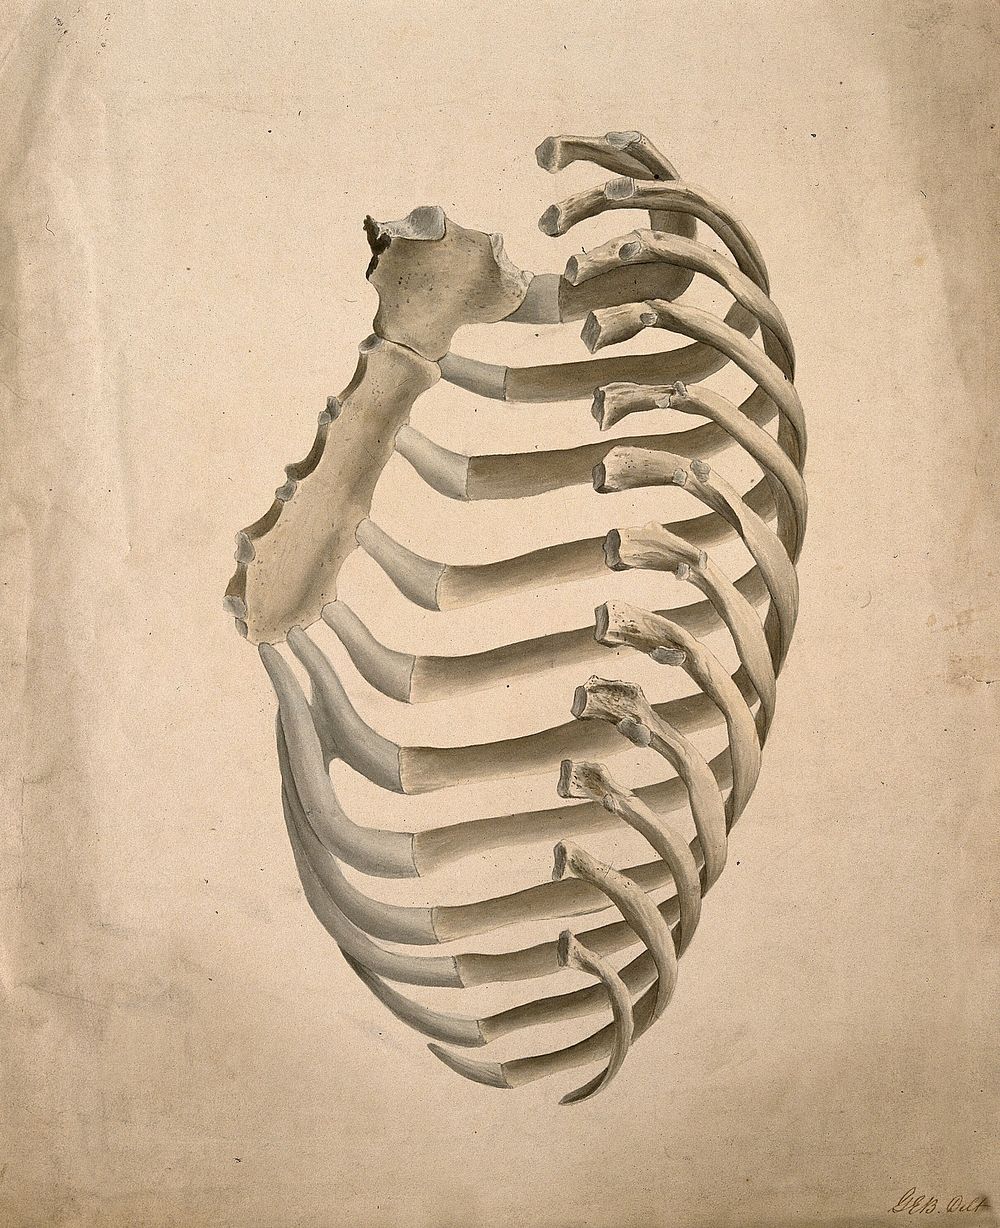 Sternum and right side of rib cage, seen from behind. Watercolour by G.E. Blenkins after a design engraved by A. Bell, 1831.